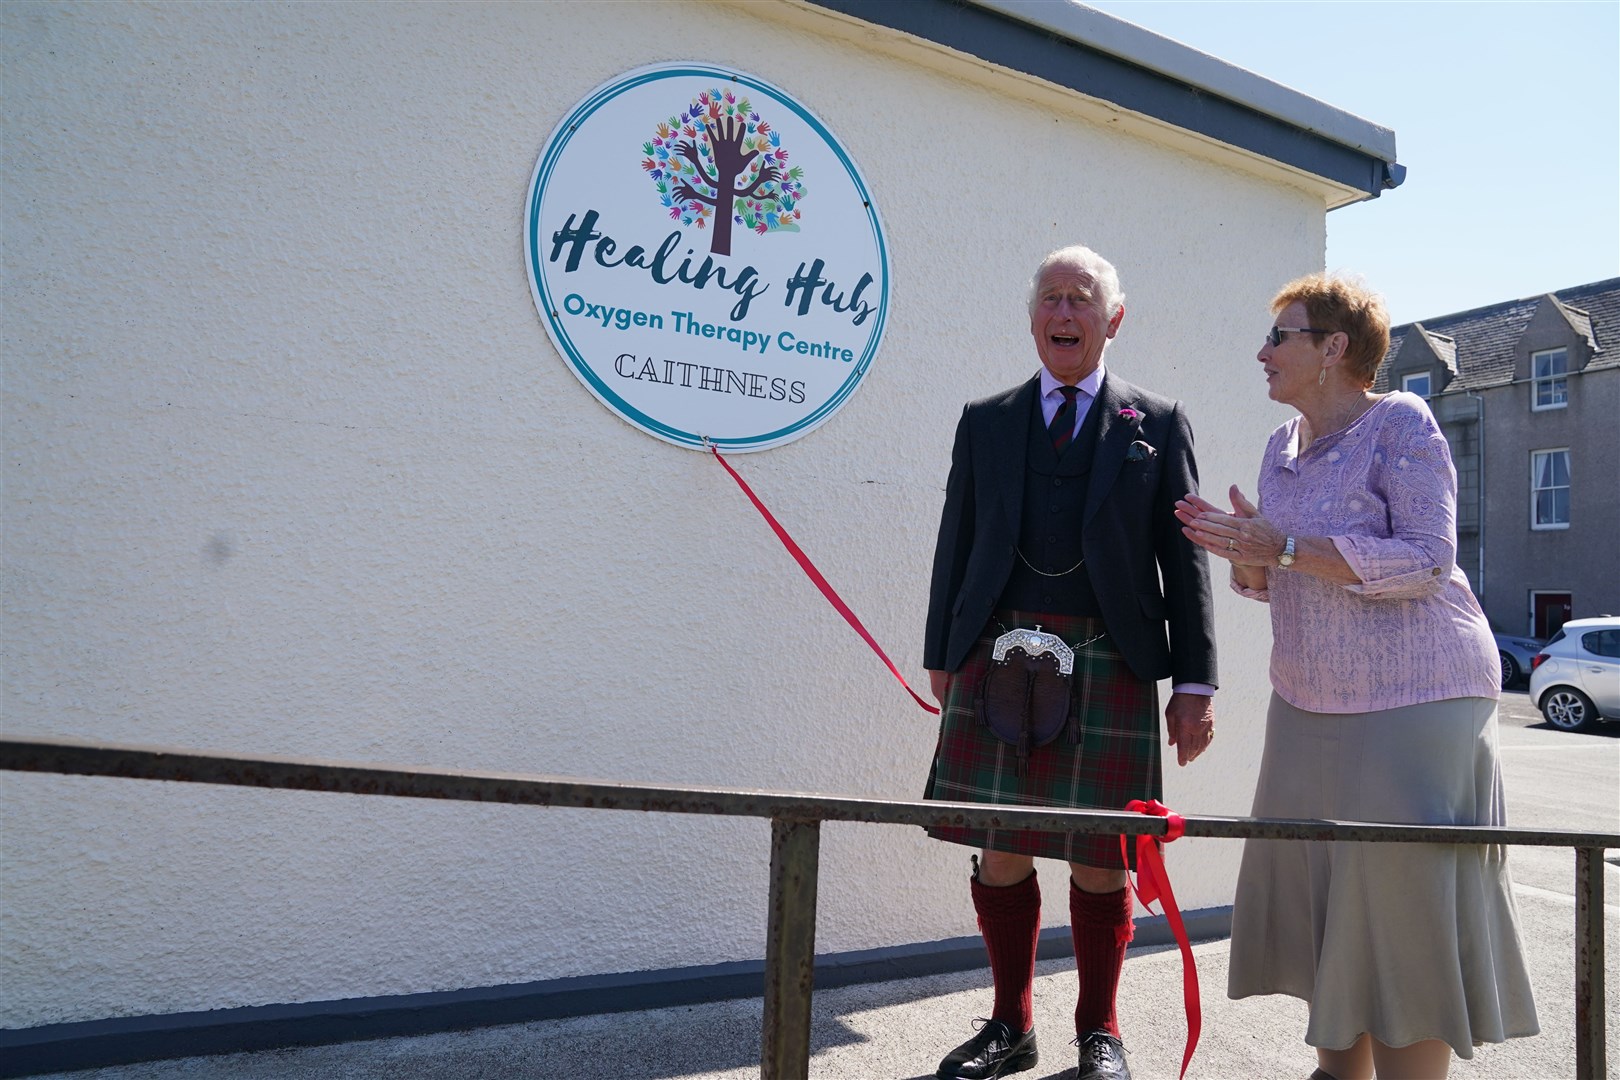 The Prince of Wales cut the ribbon at the refurbished Healing Hub Oxygen Therapy Centre in Wick (Andrew Milligan/PA)